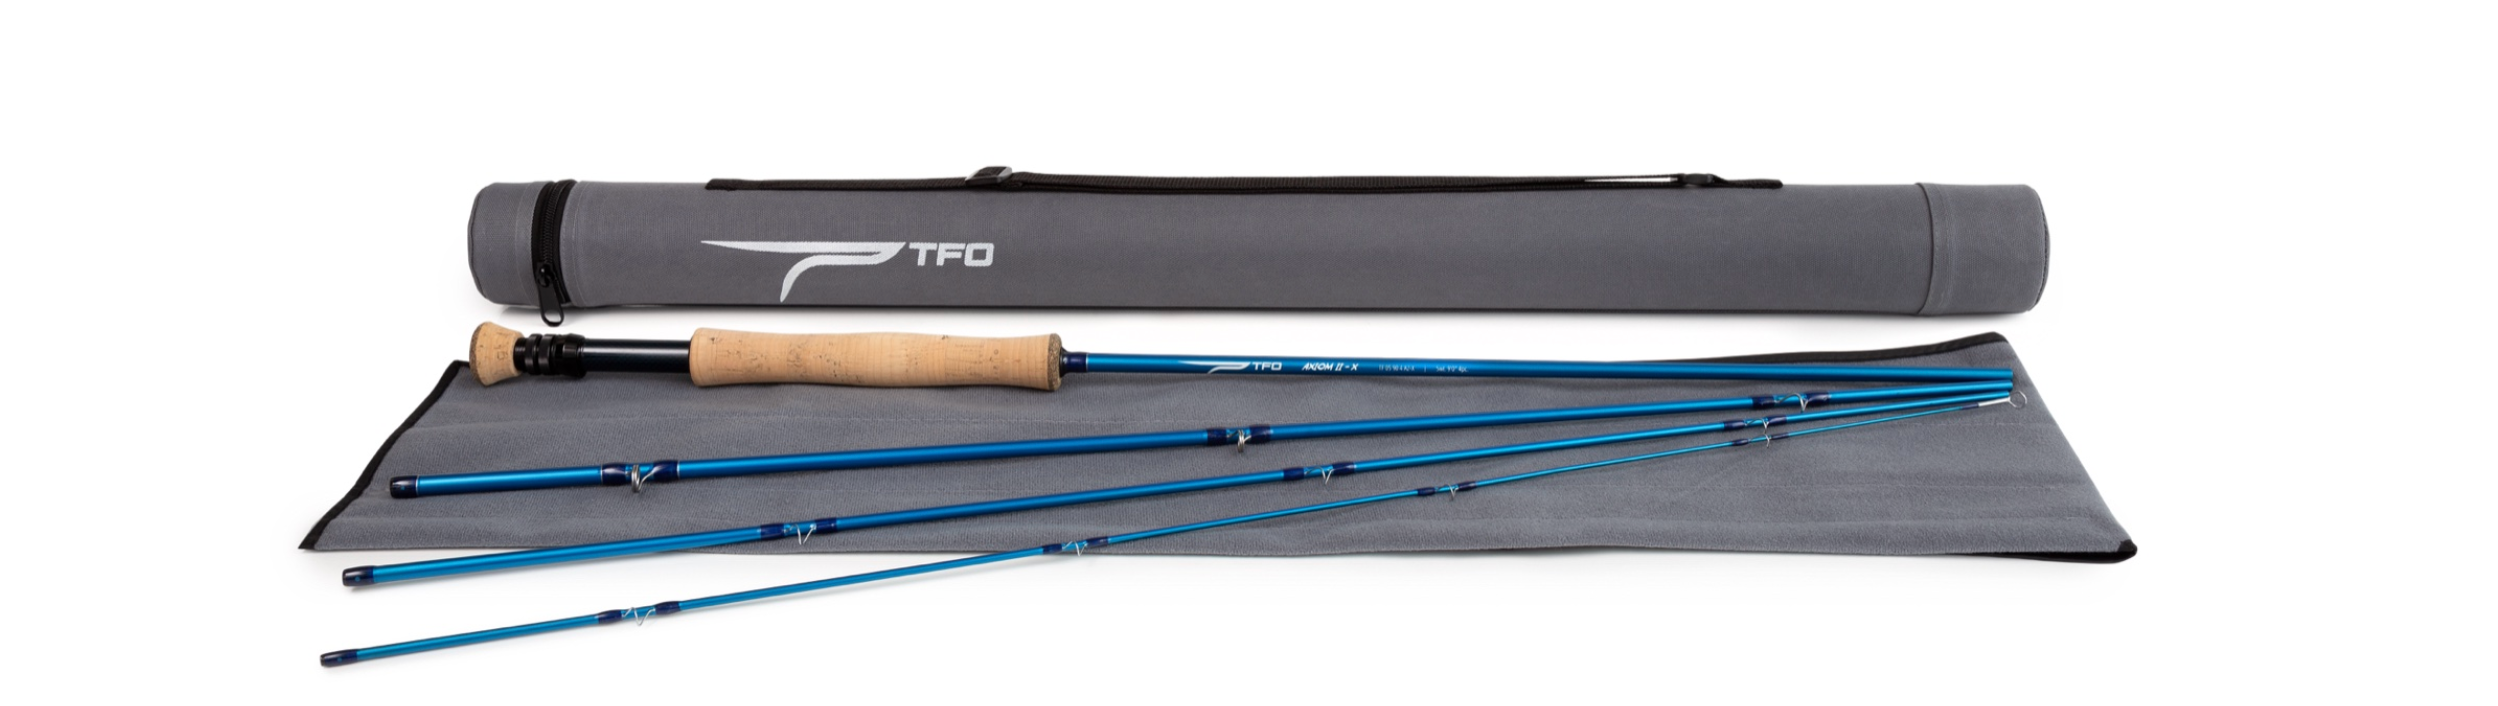 TFO Universal Rod and Reel Cases, Gear